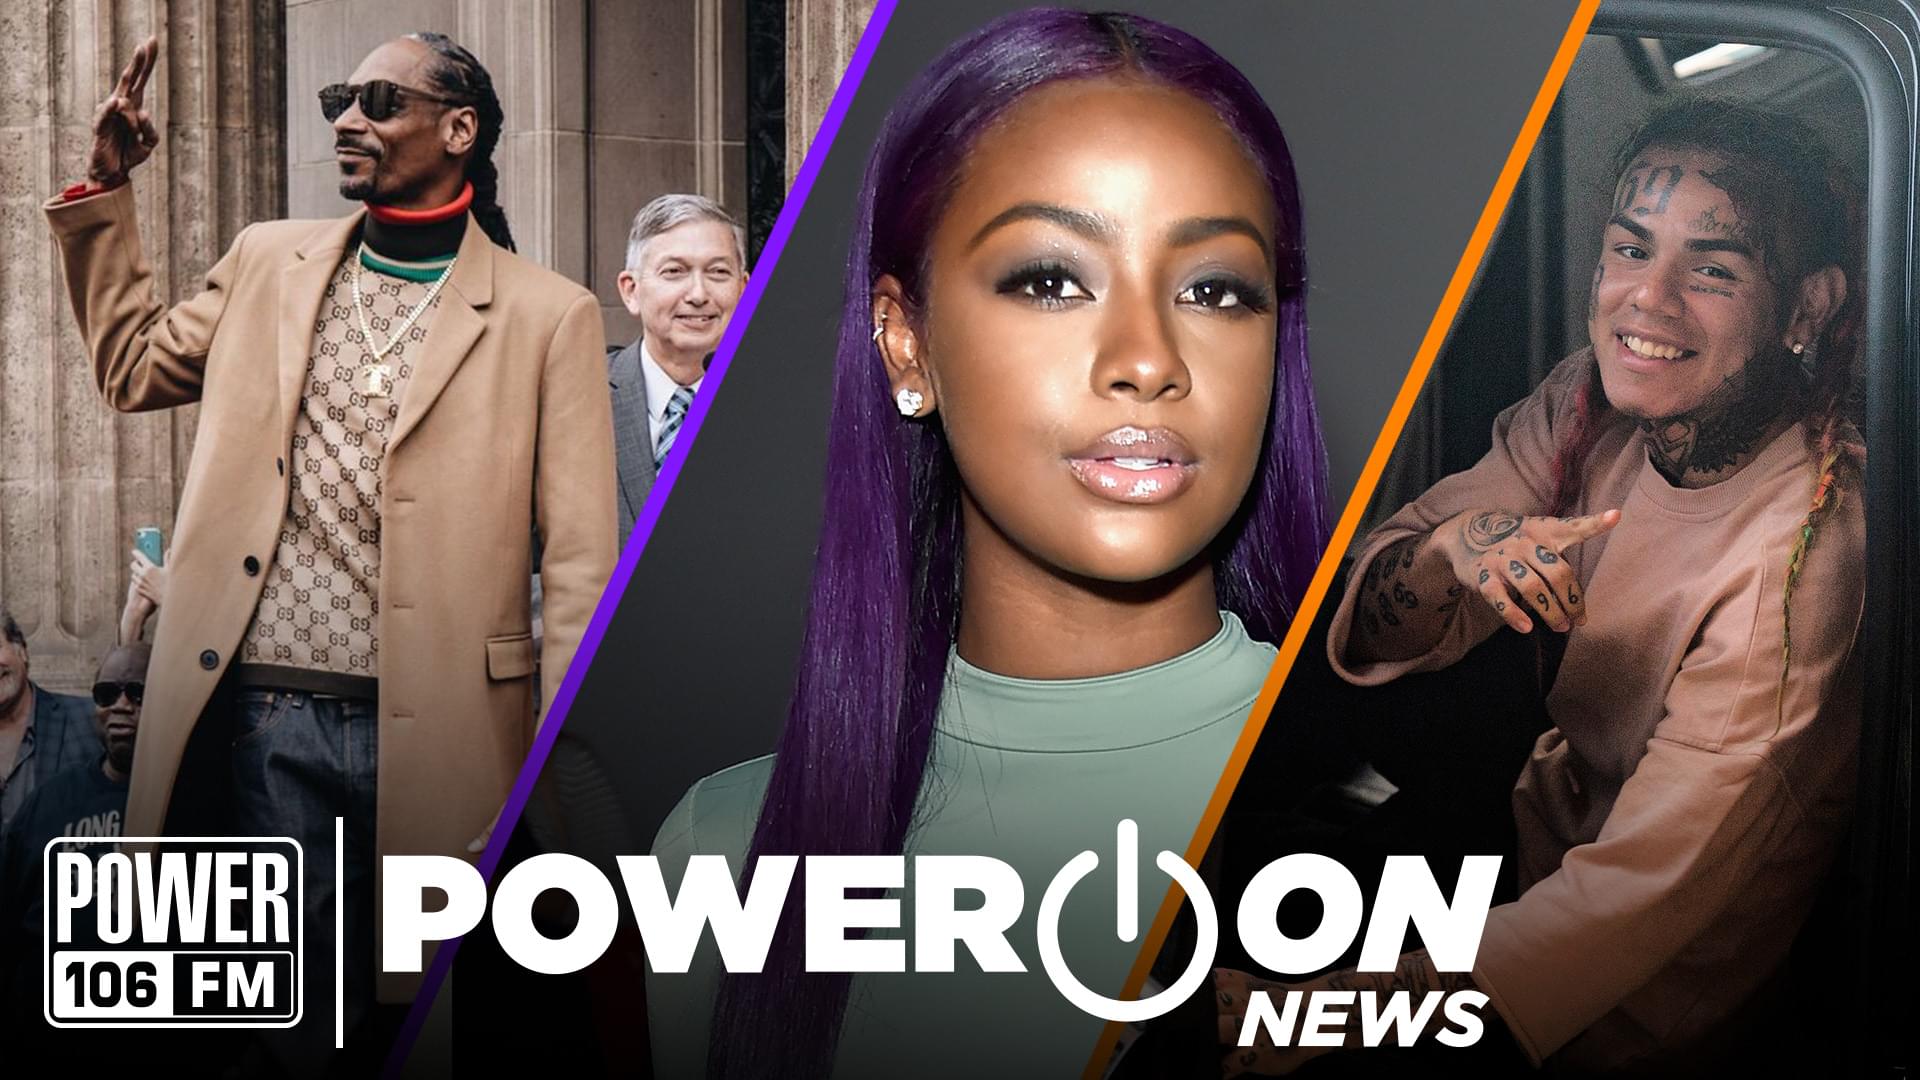 #PowerOn: Sheck Wes Faces Abuse Allegations, 6ix9ine Arrested + Snoop Dogg Receives Hollywood Star